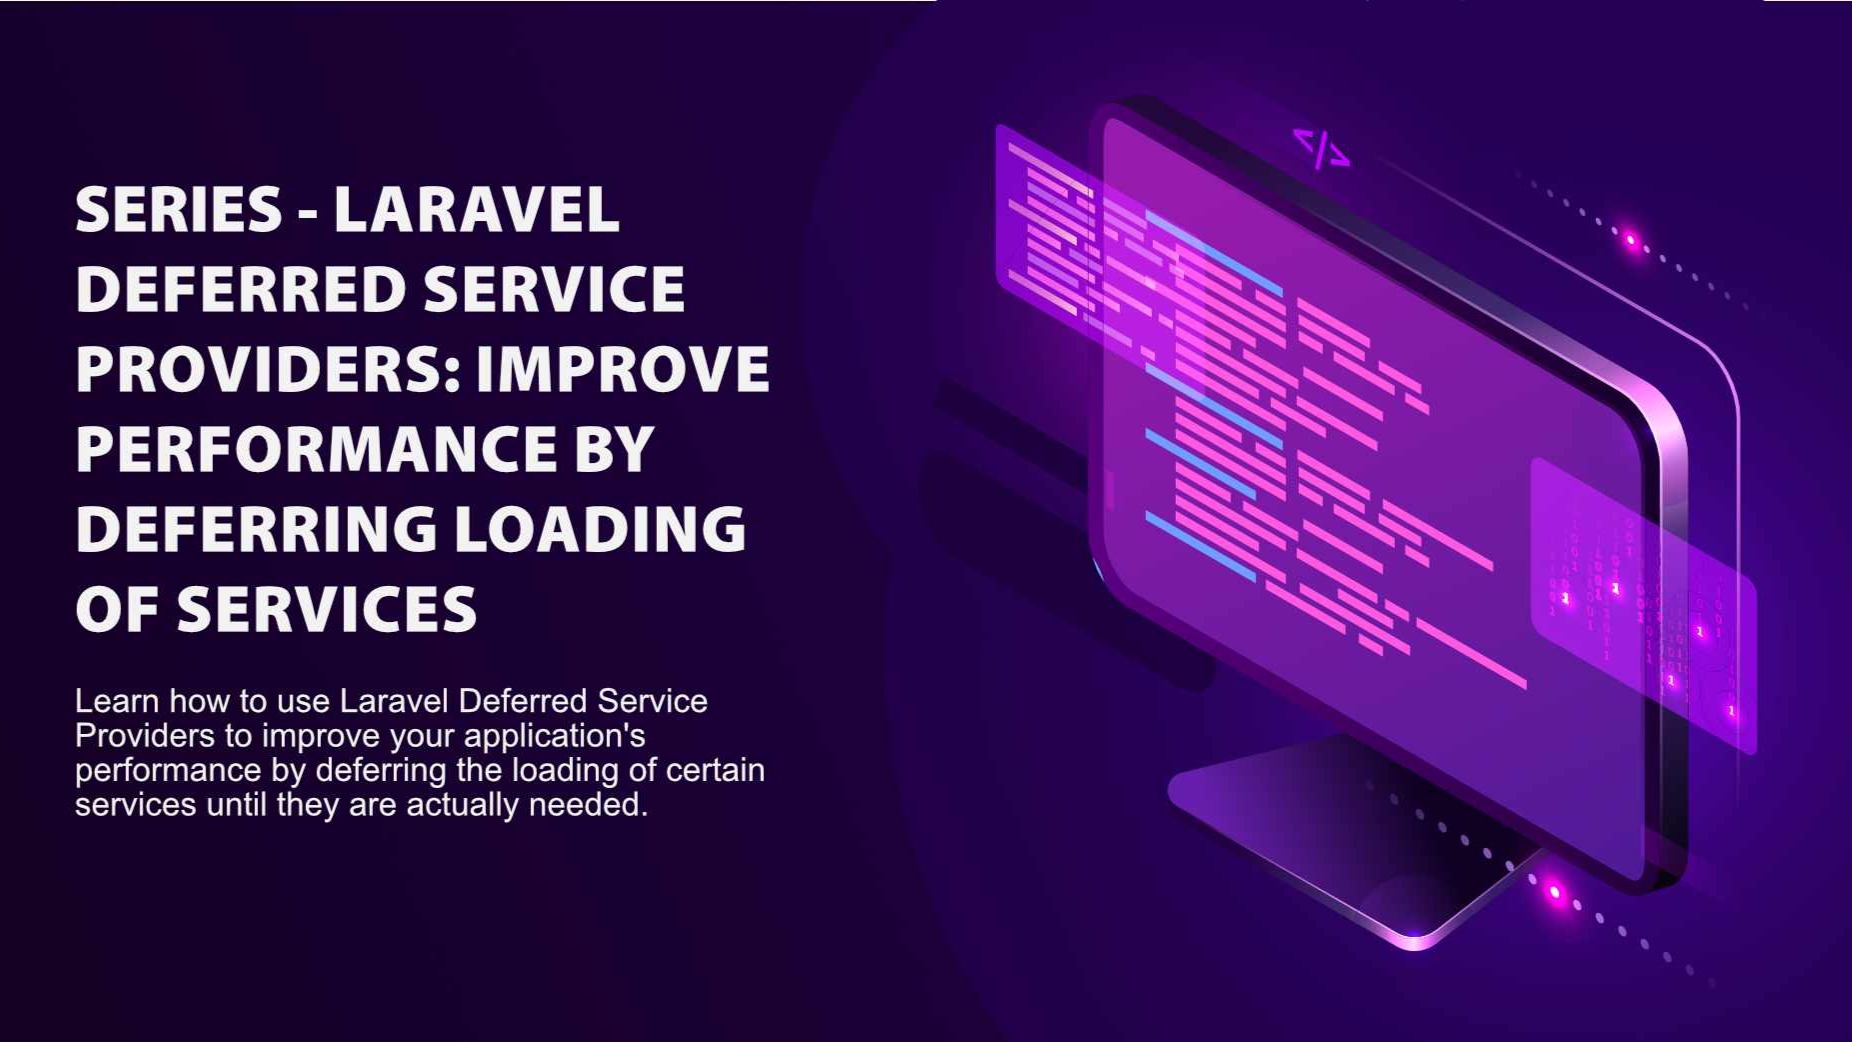 Lesson 5 - Laravel Deferred Service Providers: Improve Performance by Deferring Loading of Services